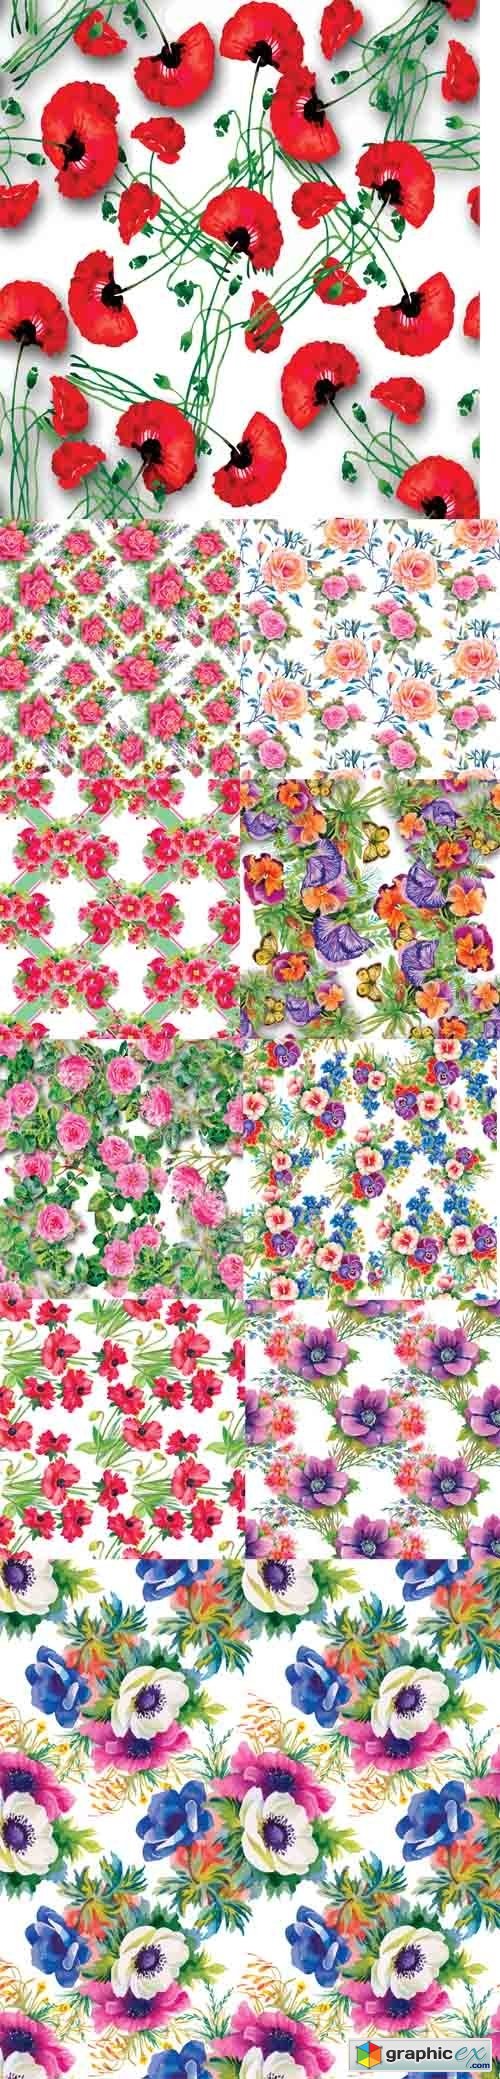 10 Seamless Patterns with Beautiful Flowers Watercolor Illustrations